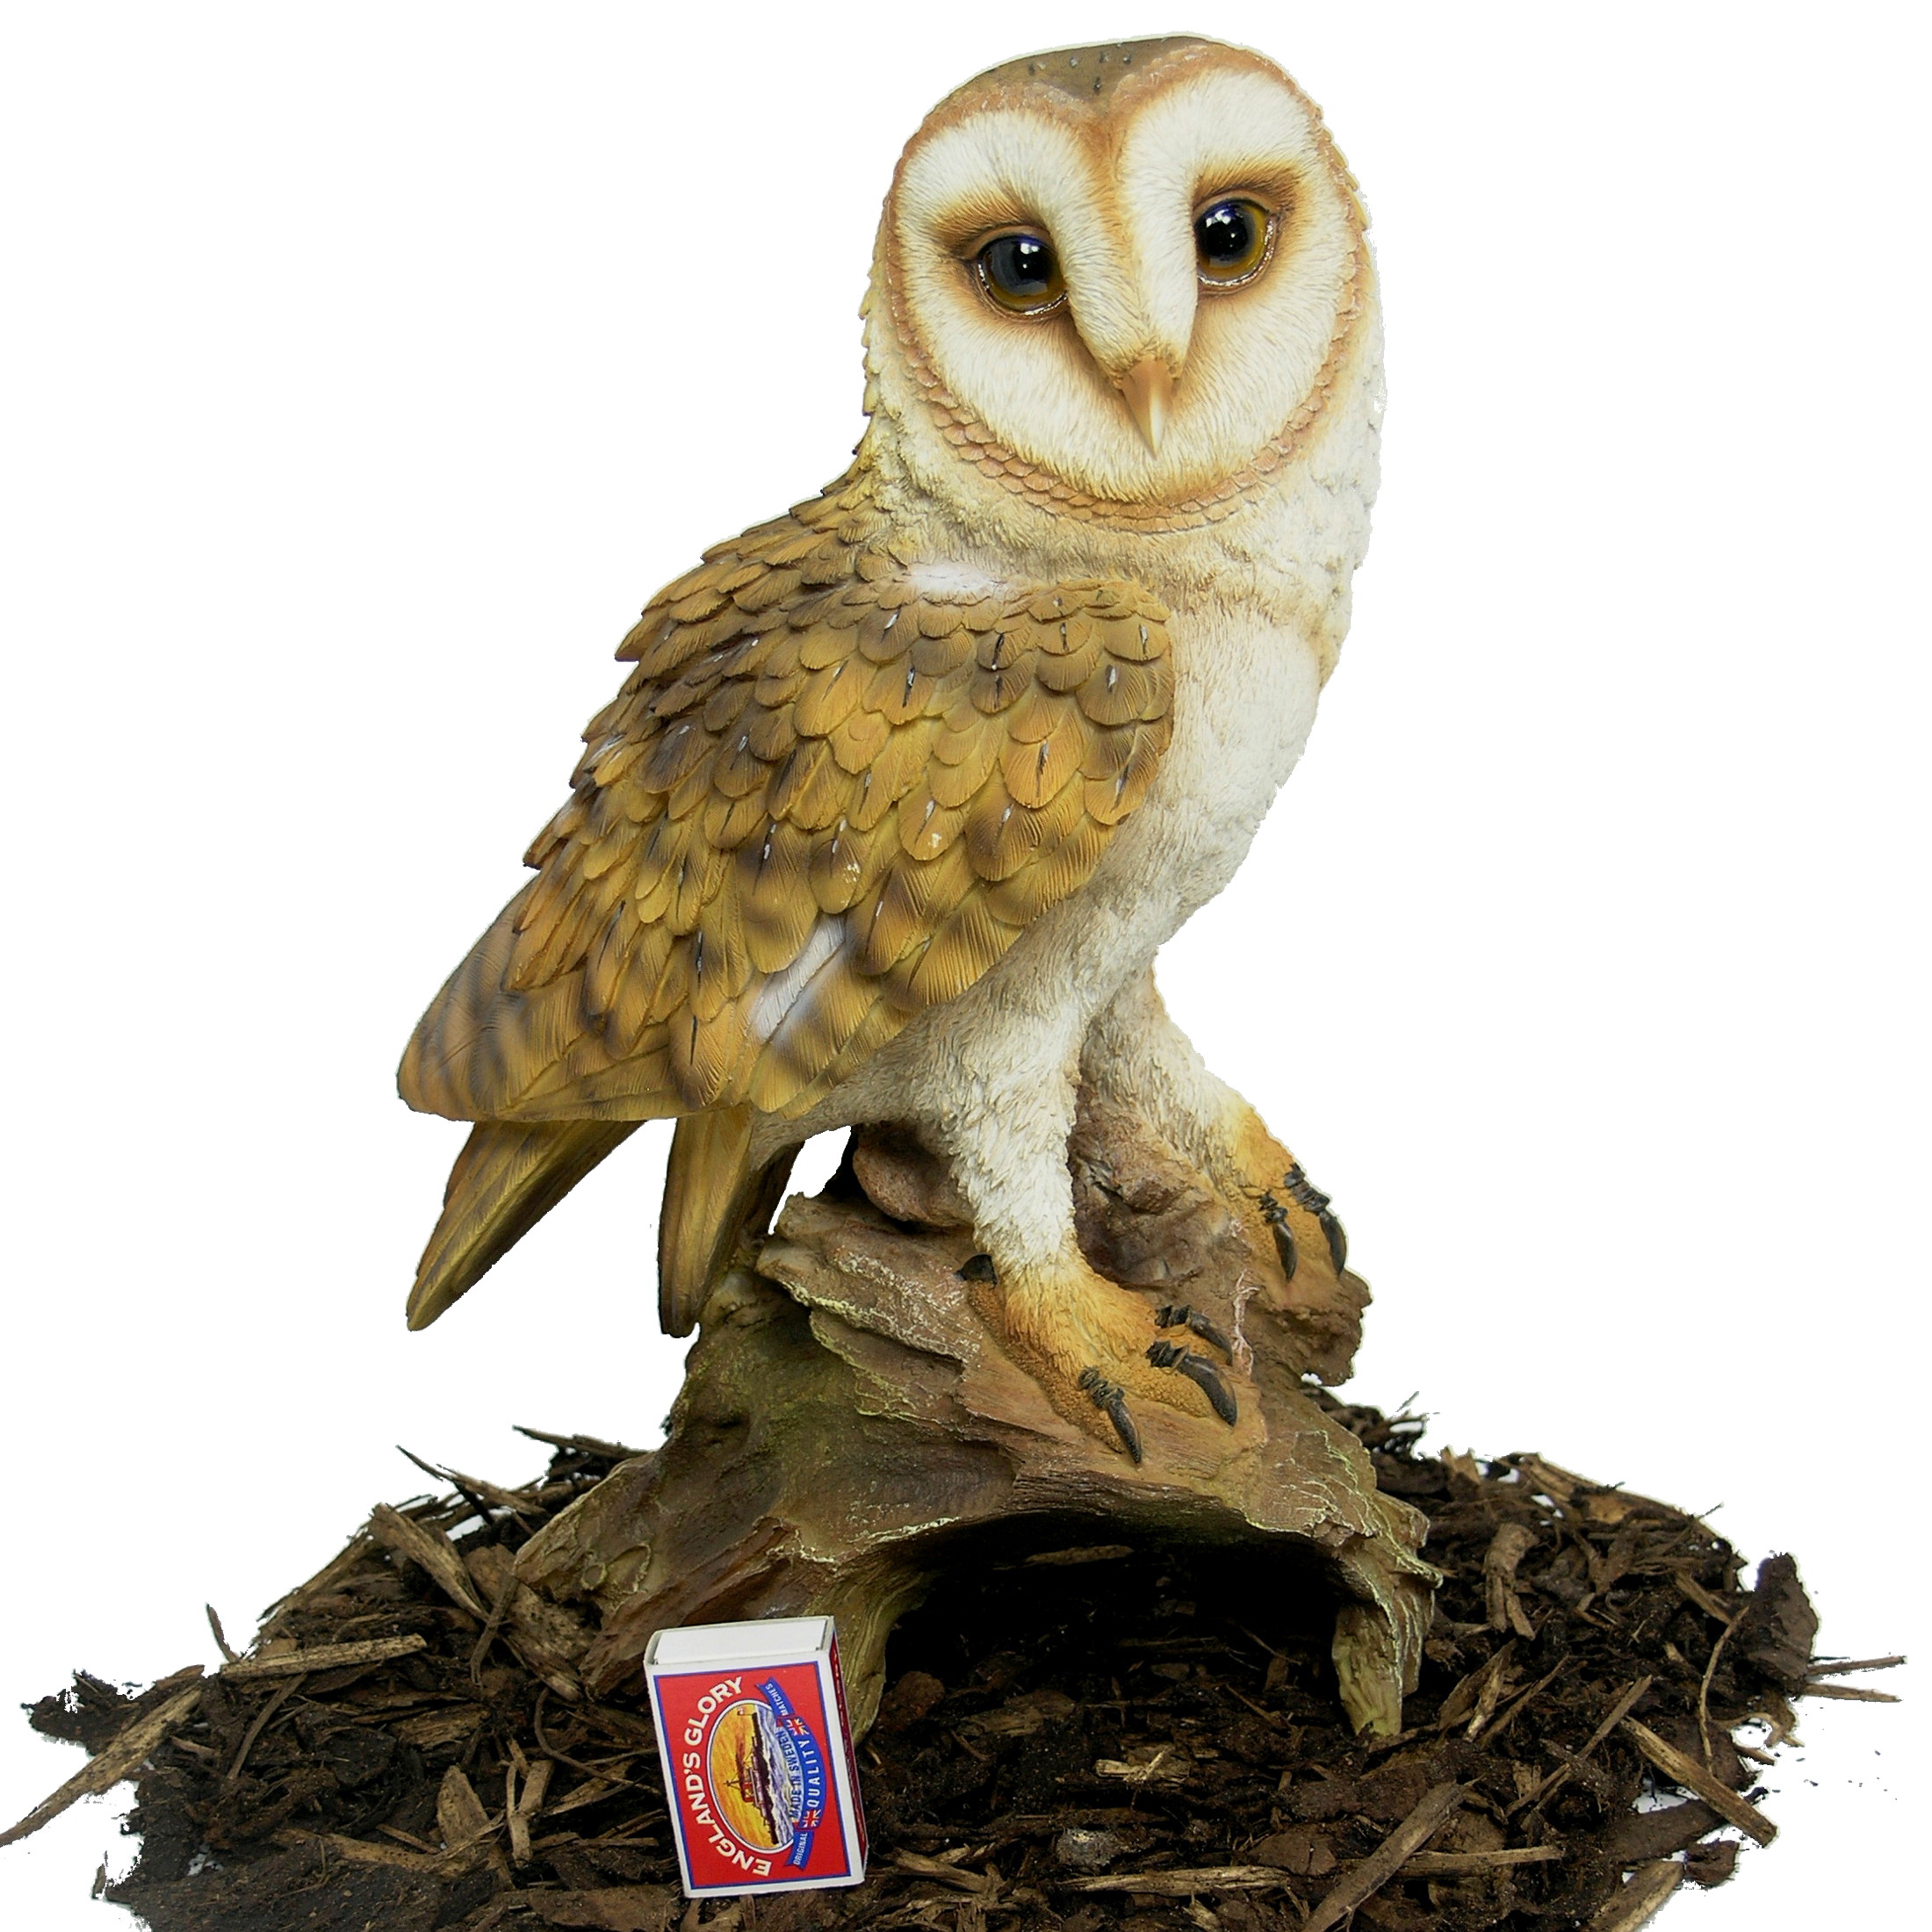 decorative lovely owls statues